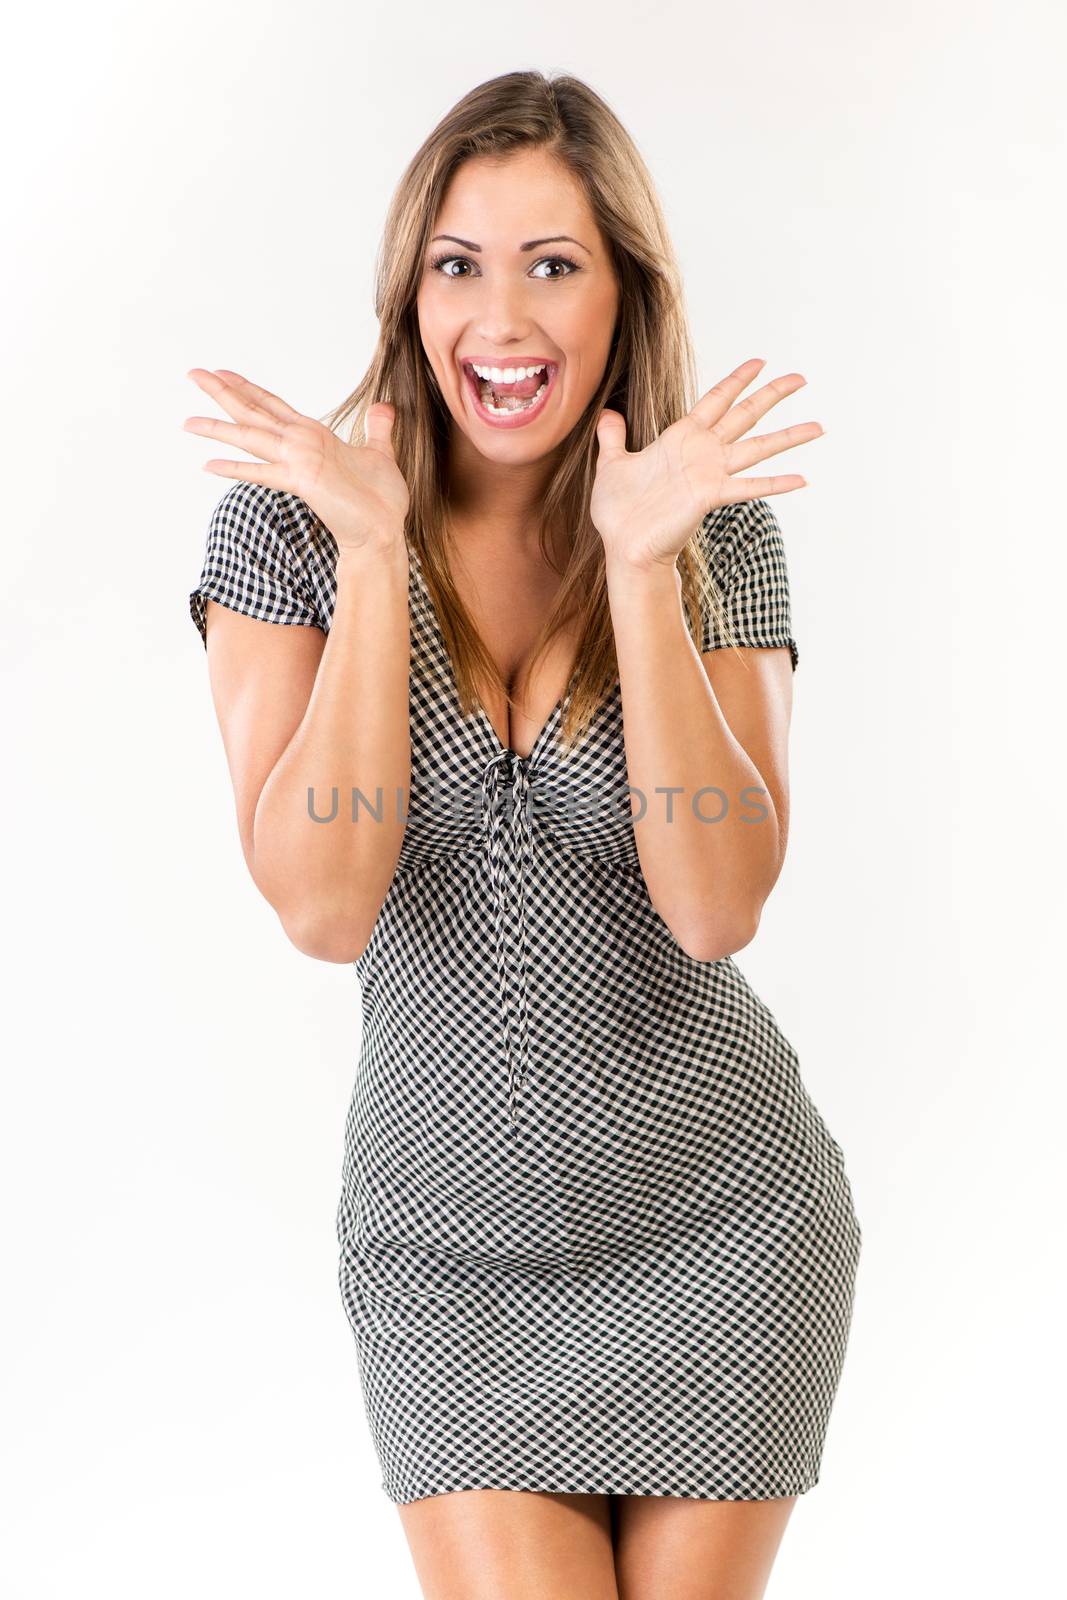 Excited surprised young woman in dress. Looking at camera. White background.